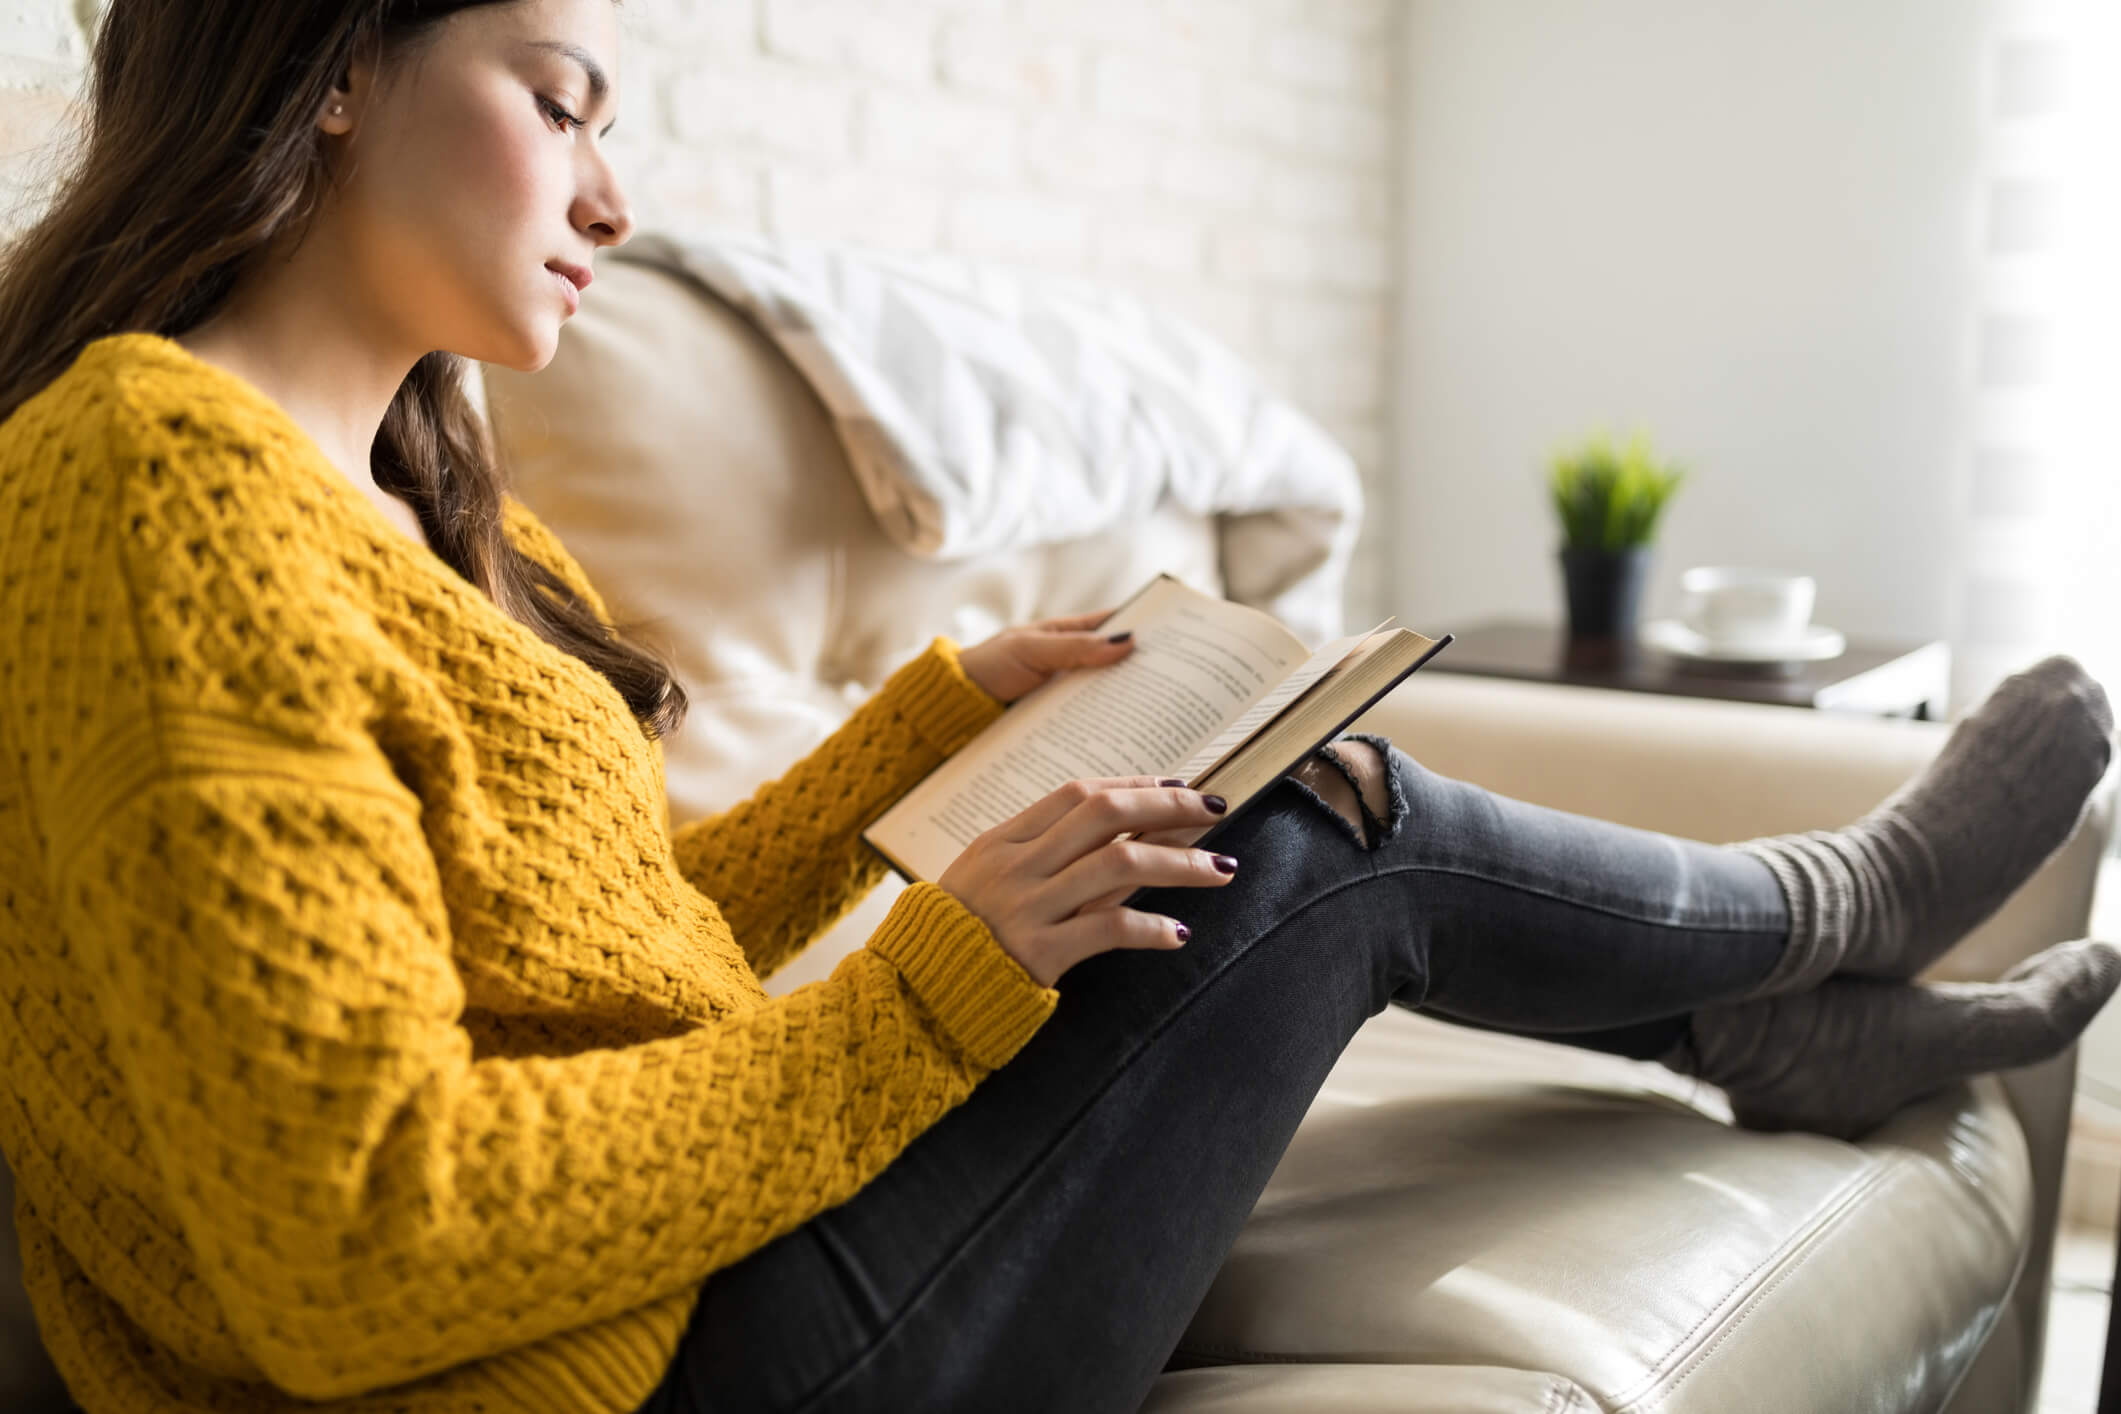 A young woman sitting on a couch and reading a book.